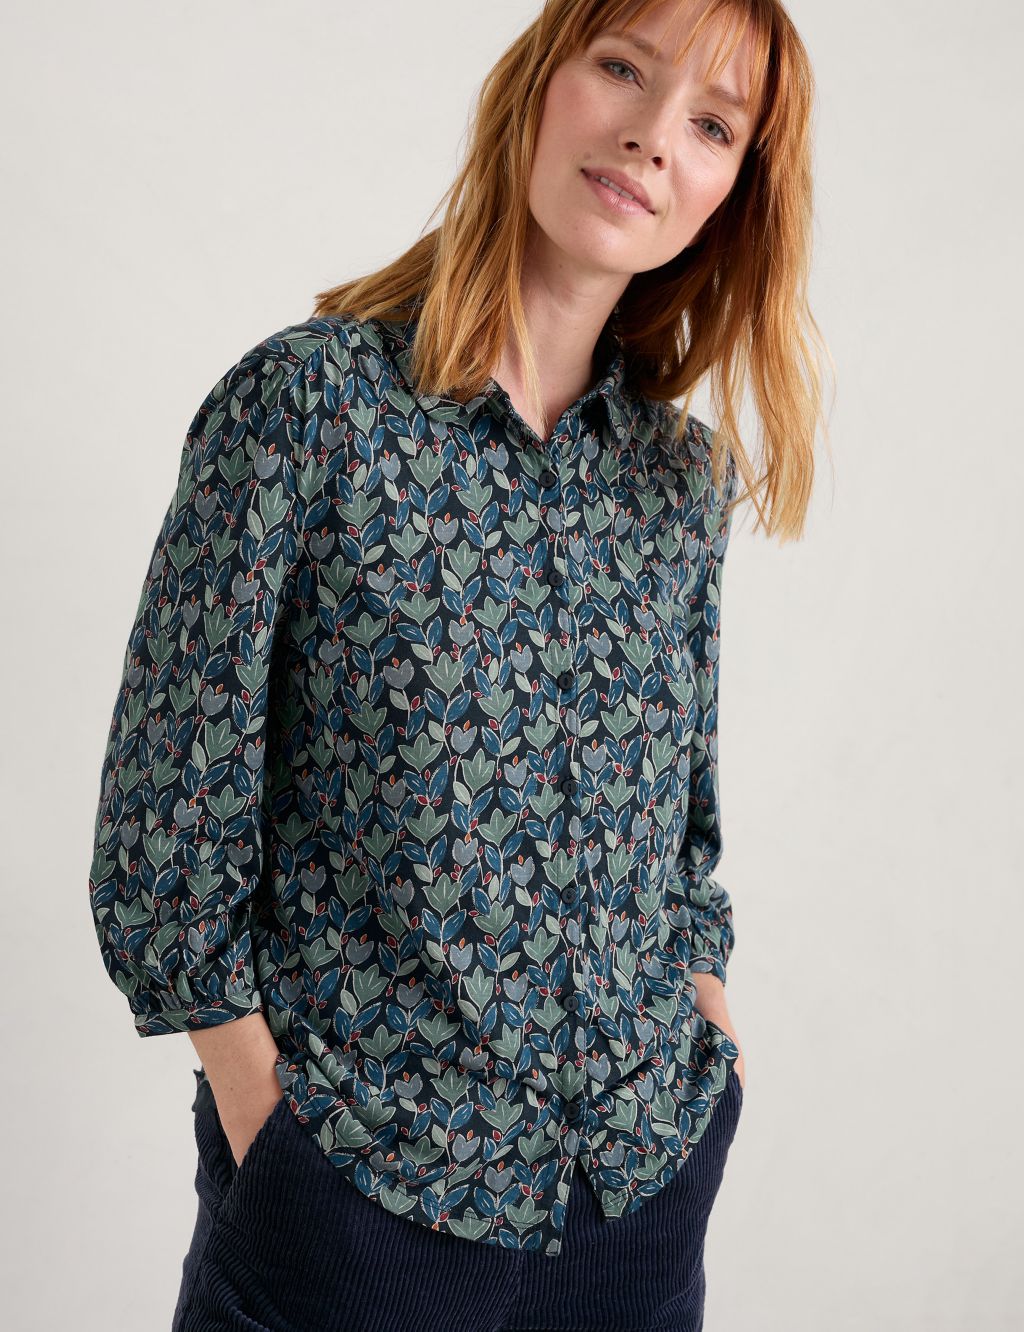 Cotton Modal Blend Floral Collared Shirt image 3